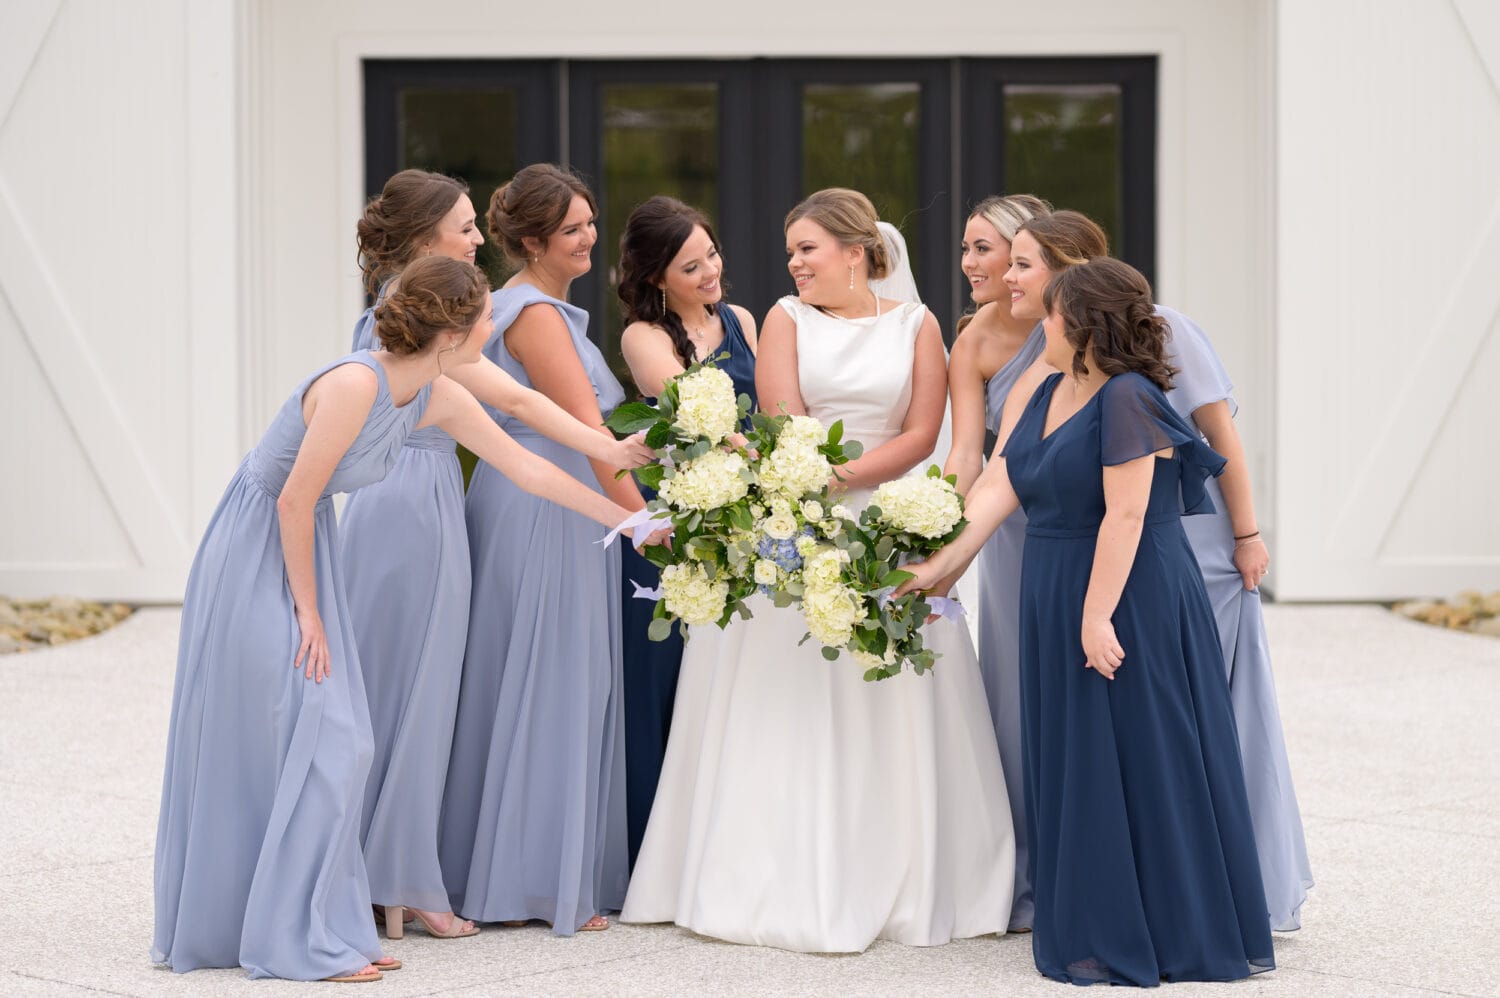 Bridesmaids holding flowers together - The Venue at White Oaks Farm